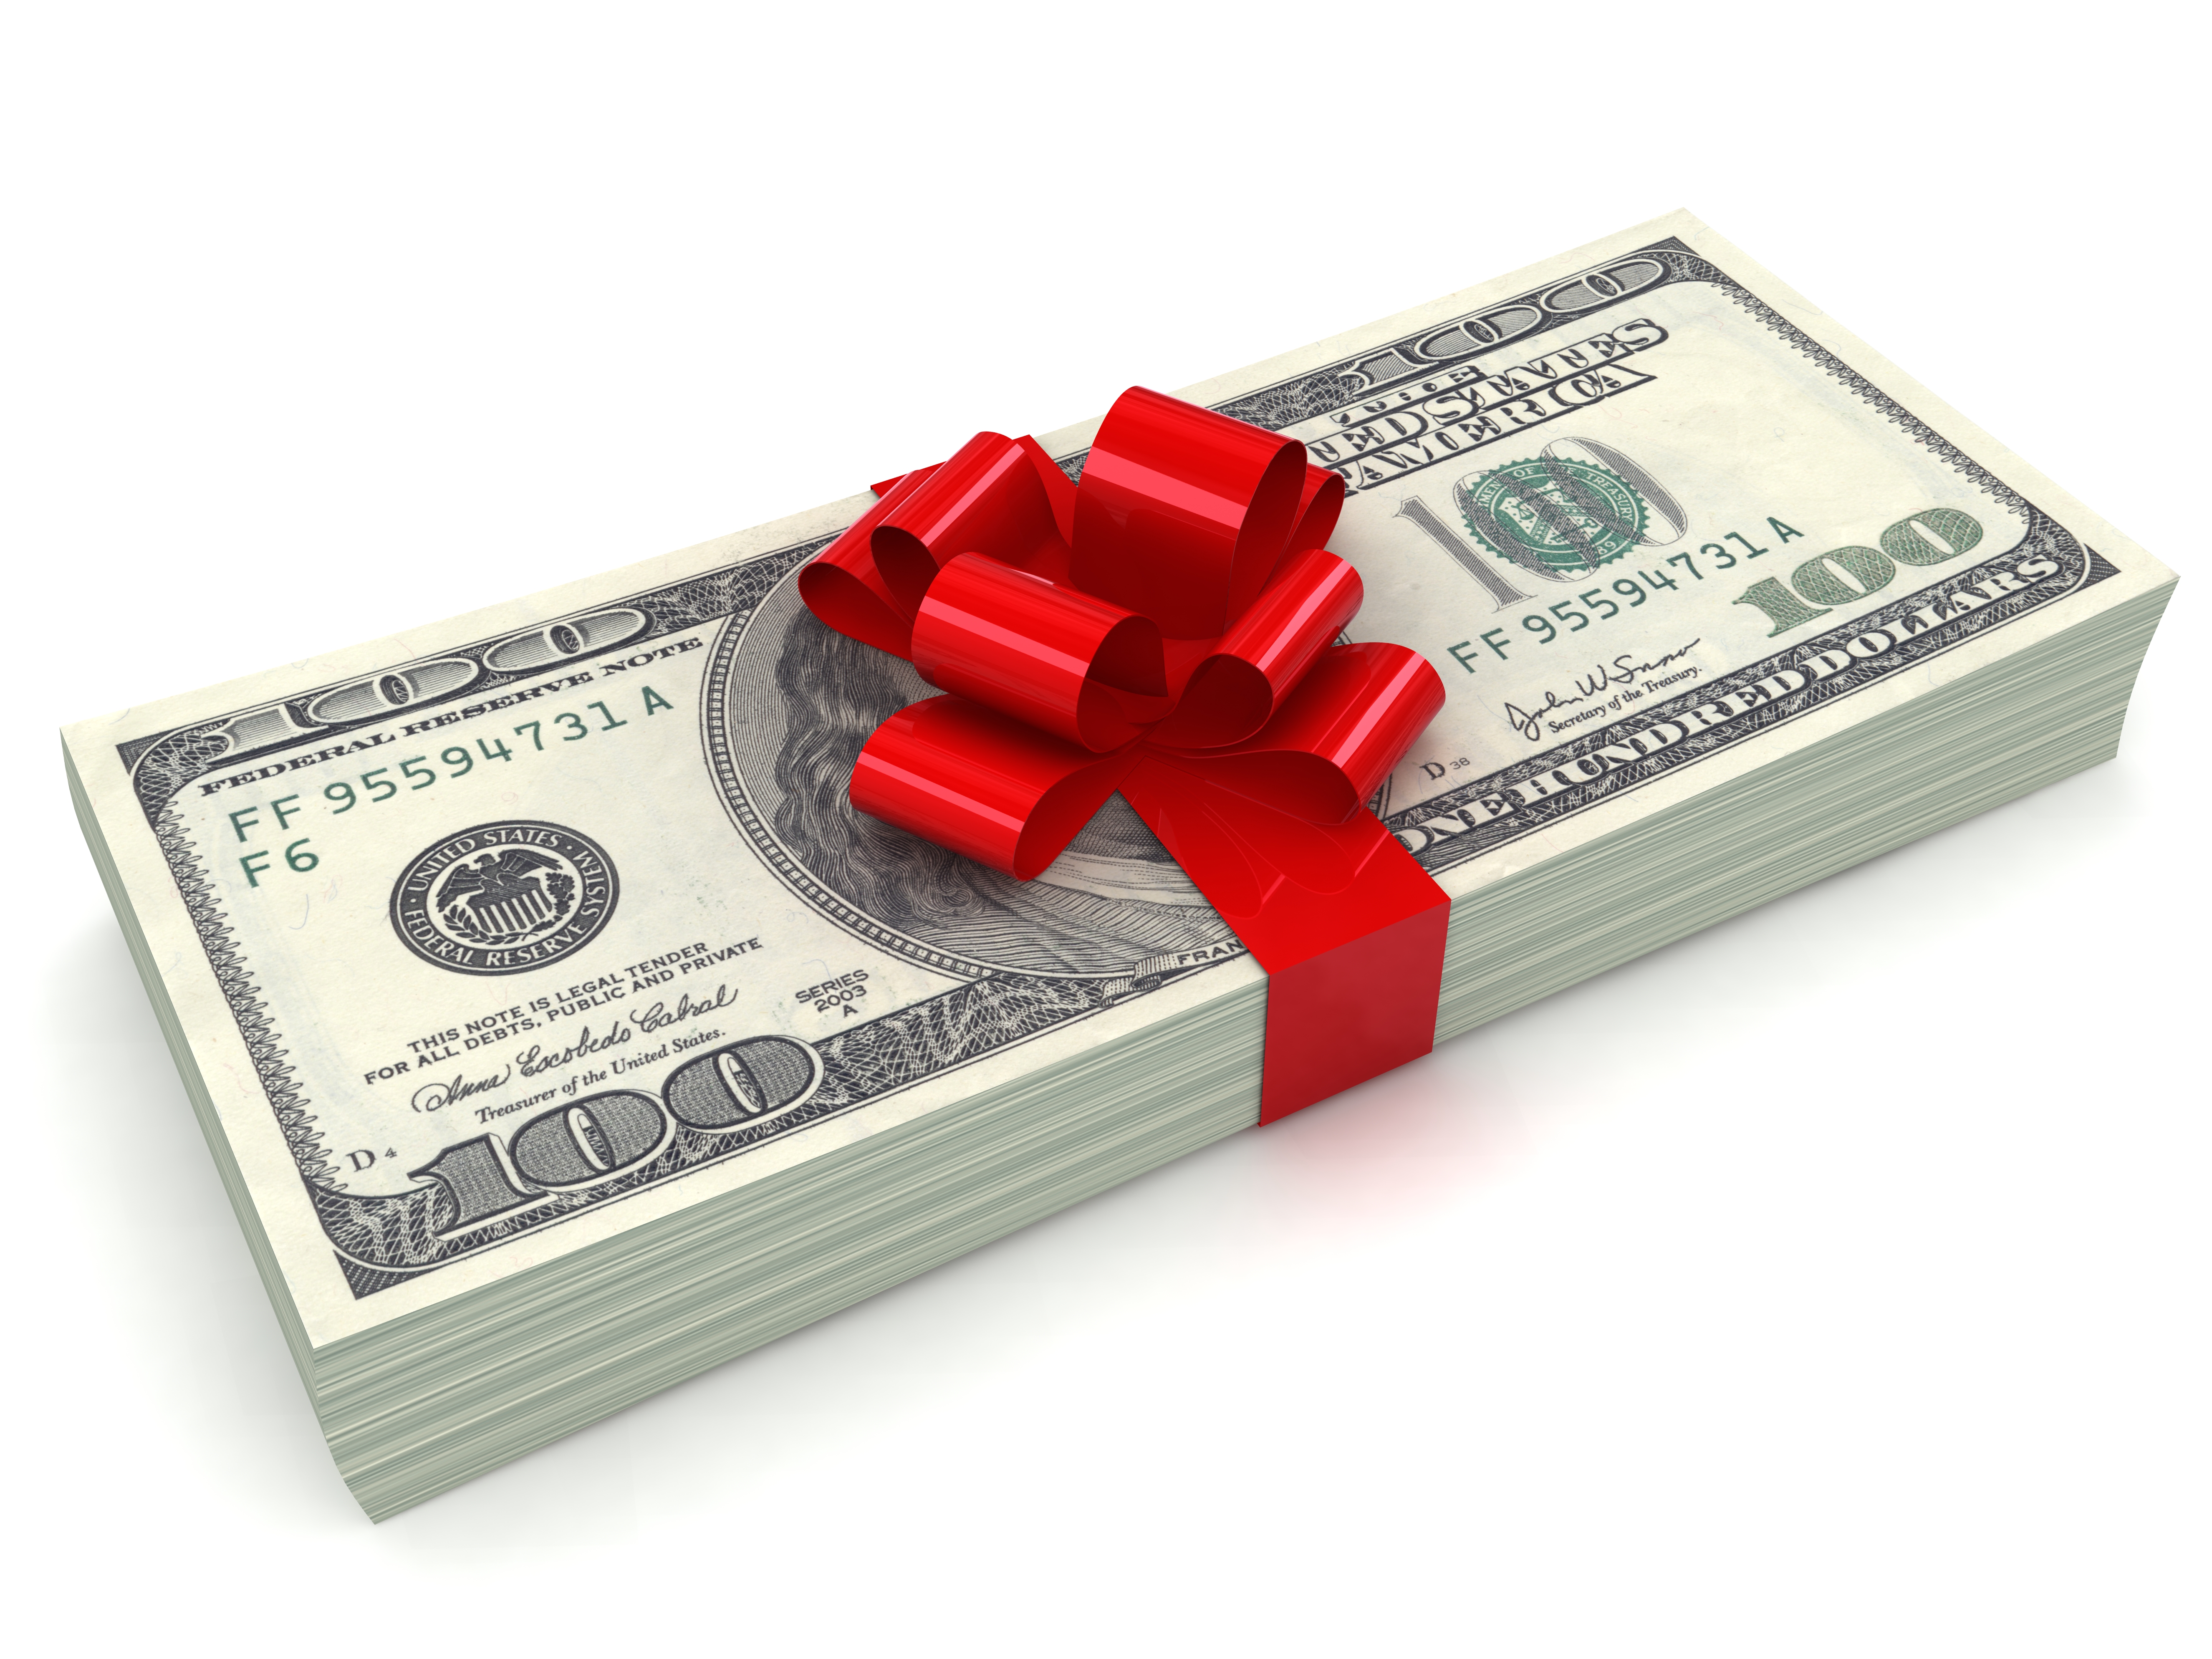 Dollar bills wrapped in a red ribbon | Source: Getty Images